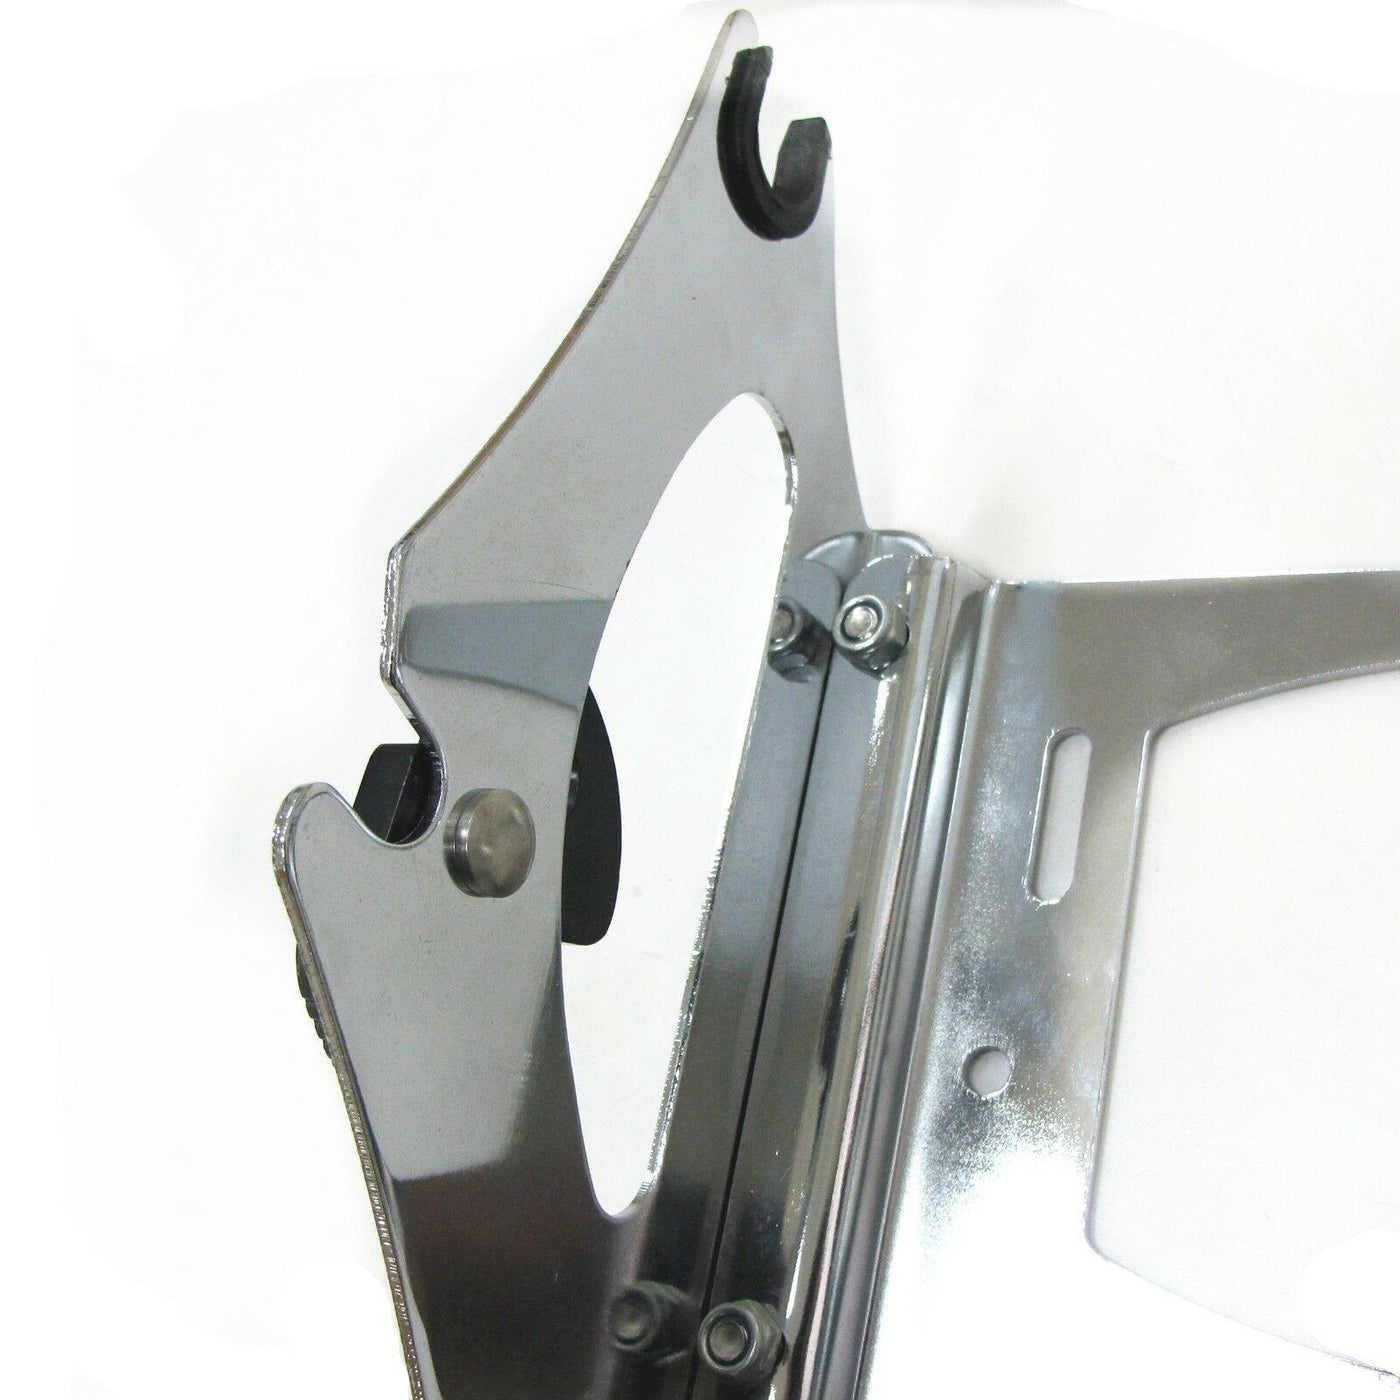 Chrome Two-Up Trunk Mounting Rack W/ docking hardware For 09-13 Harley Touring - Moto Life Products